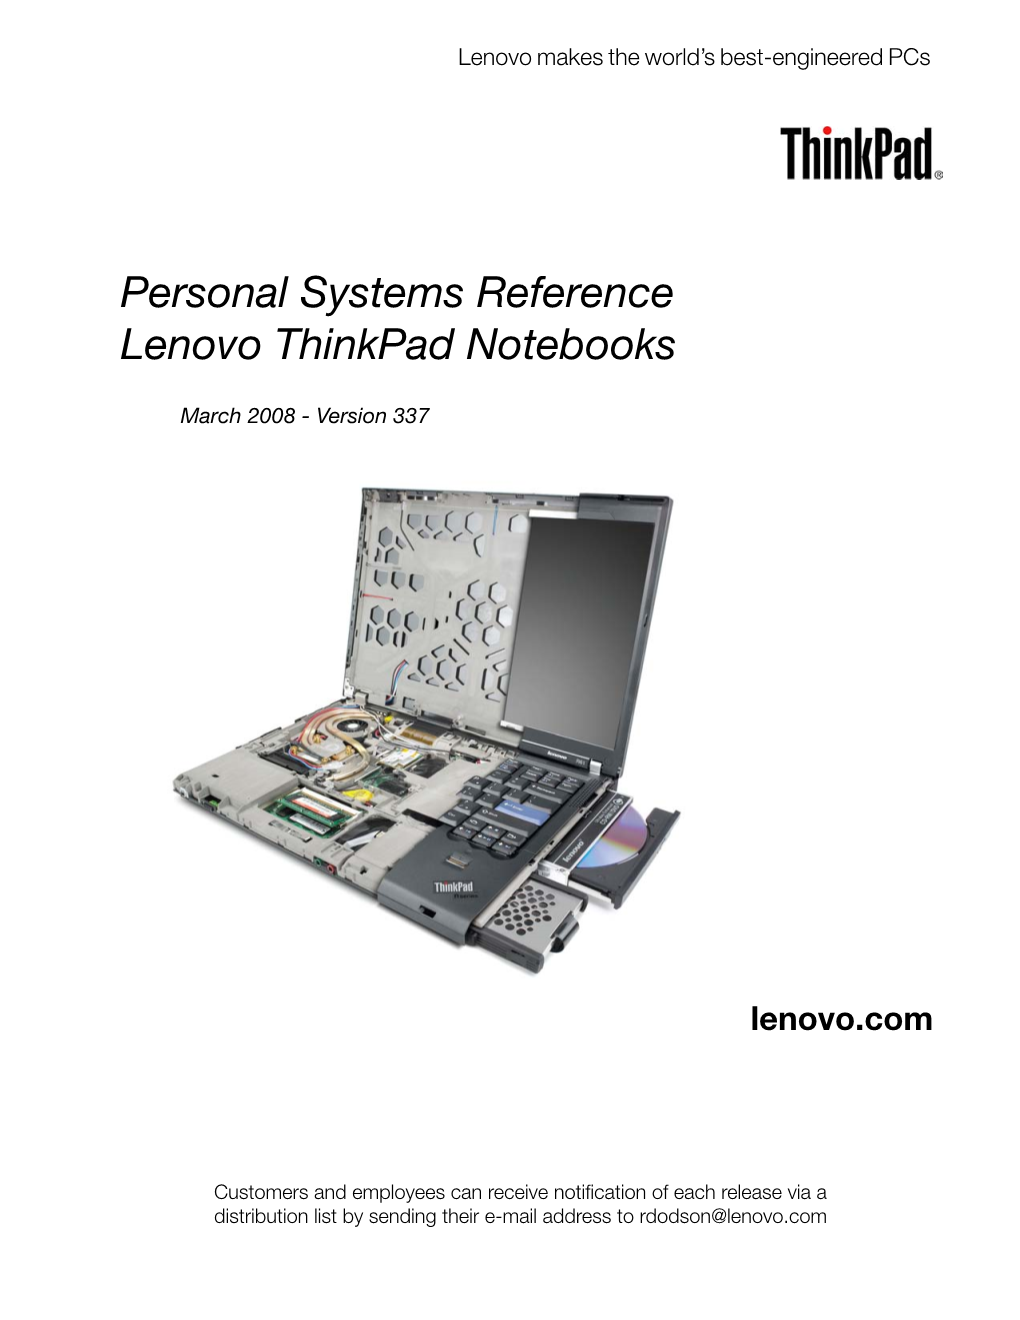 Personal Systems Reference Lenovo Thinkpad Notebooks